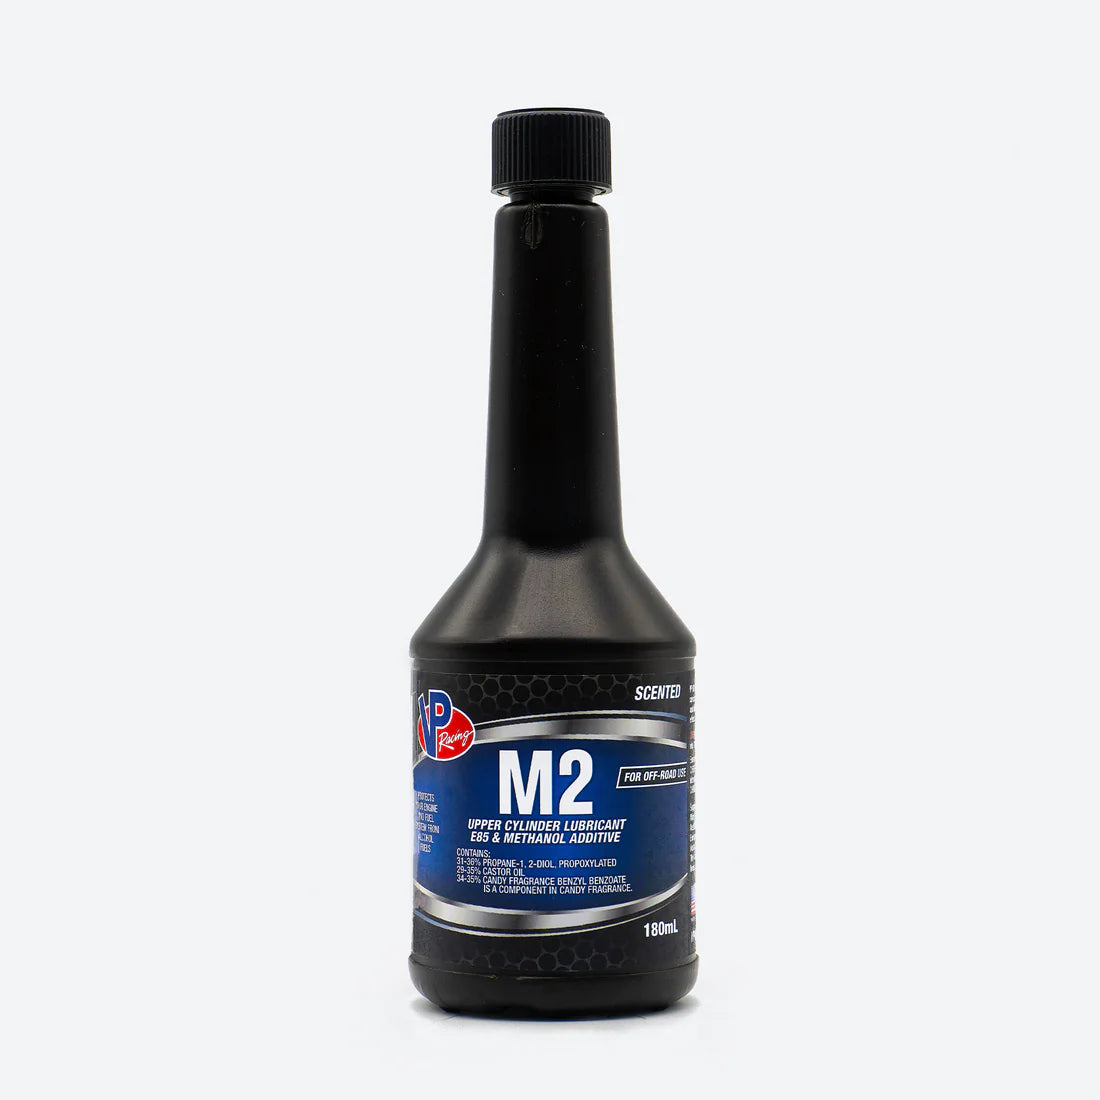 M2 Scented Upper Cylinder Lubricant Single Tank Treatment